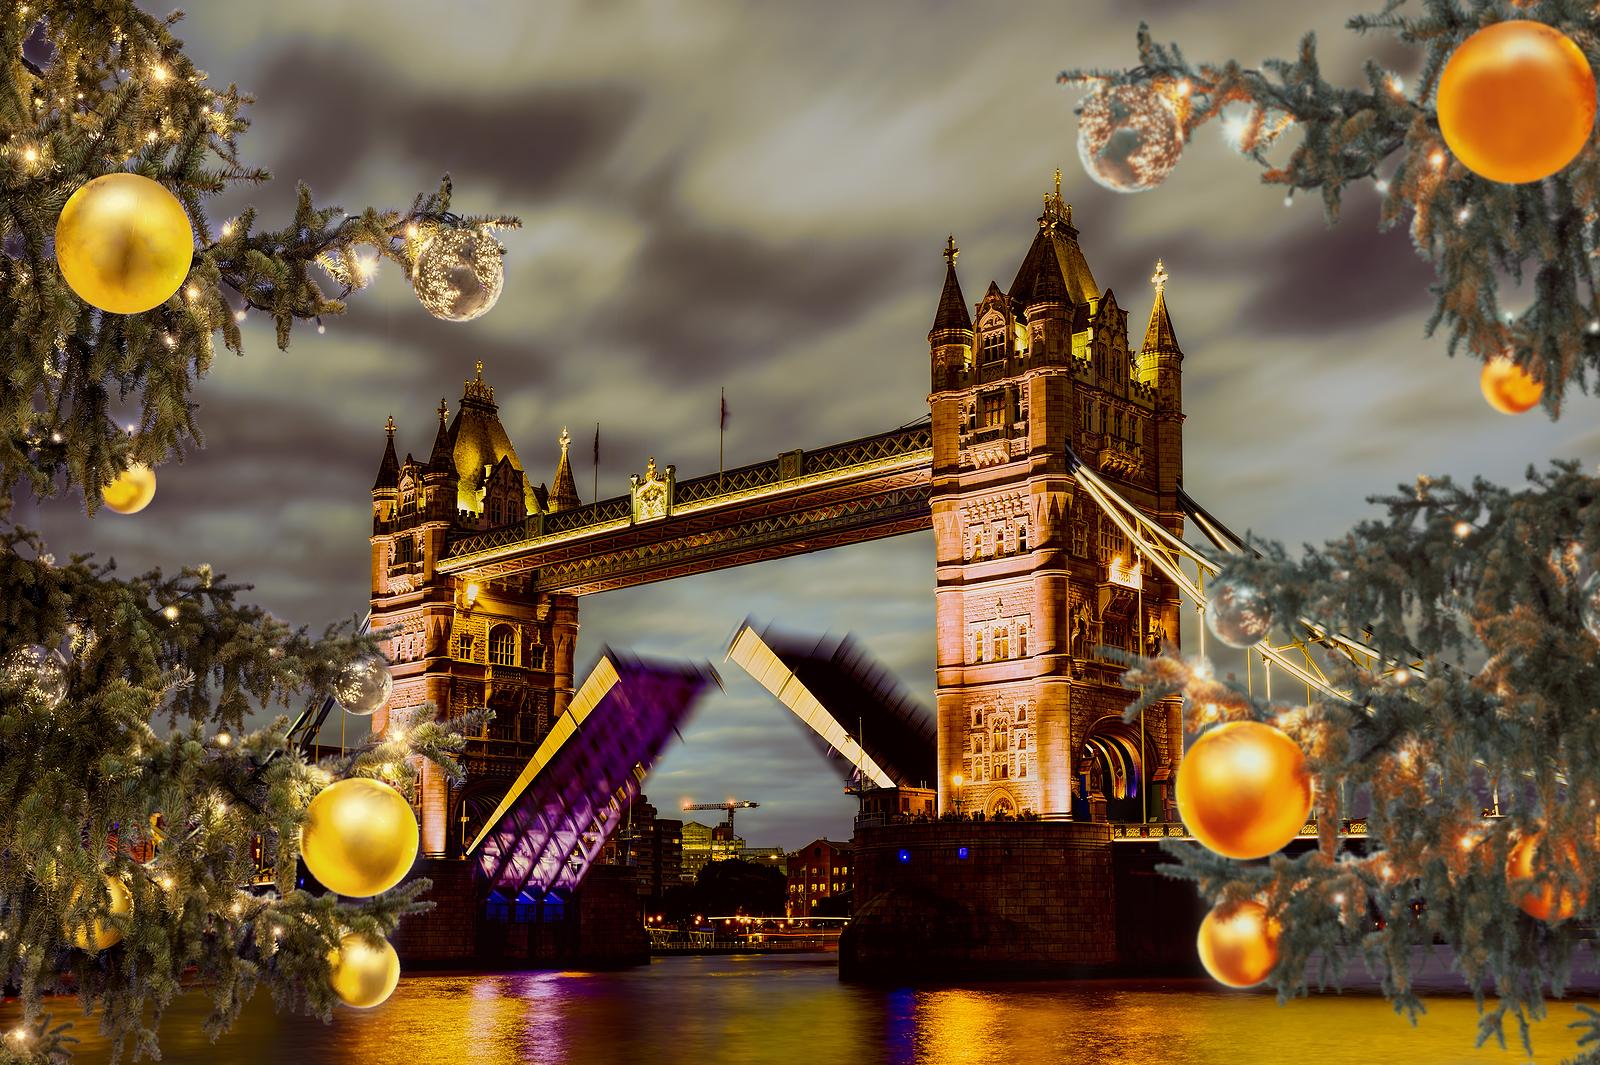 5 Top Christmas Shopping Destinations In The UK To Visit